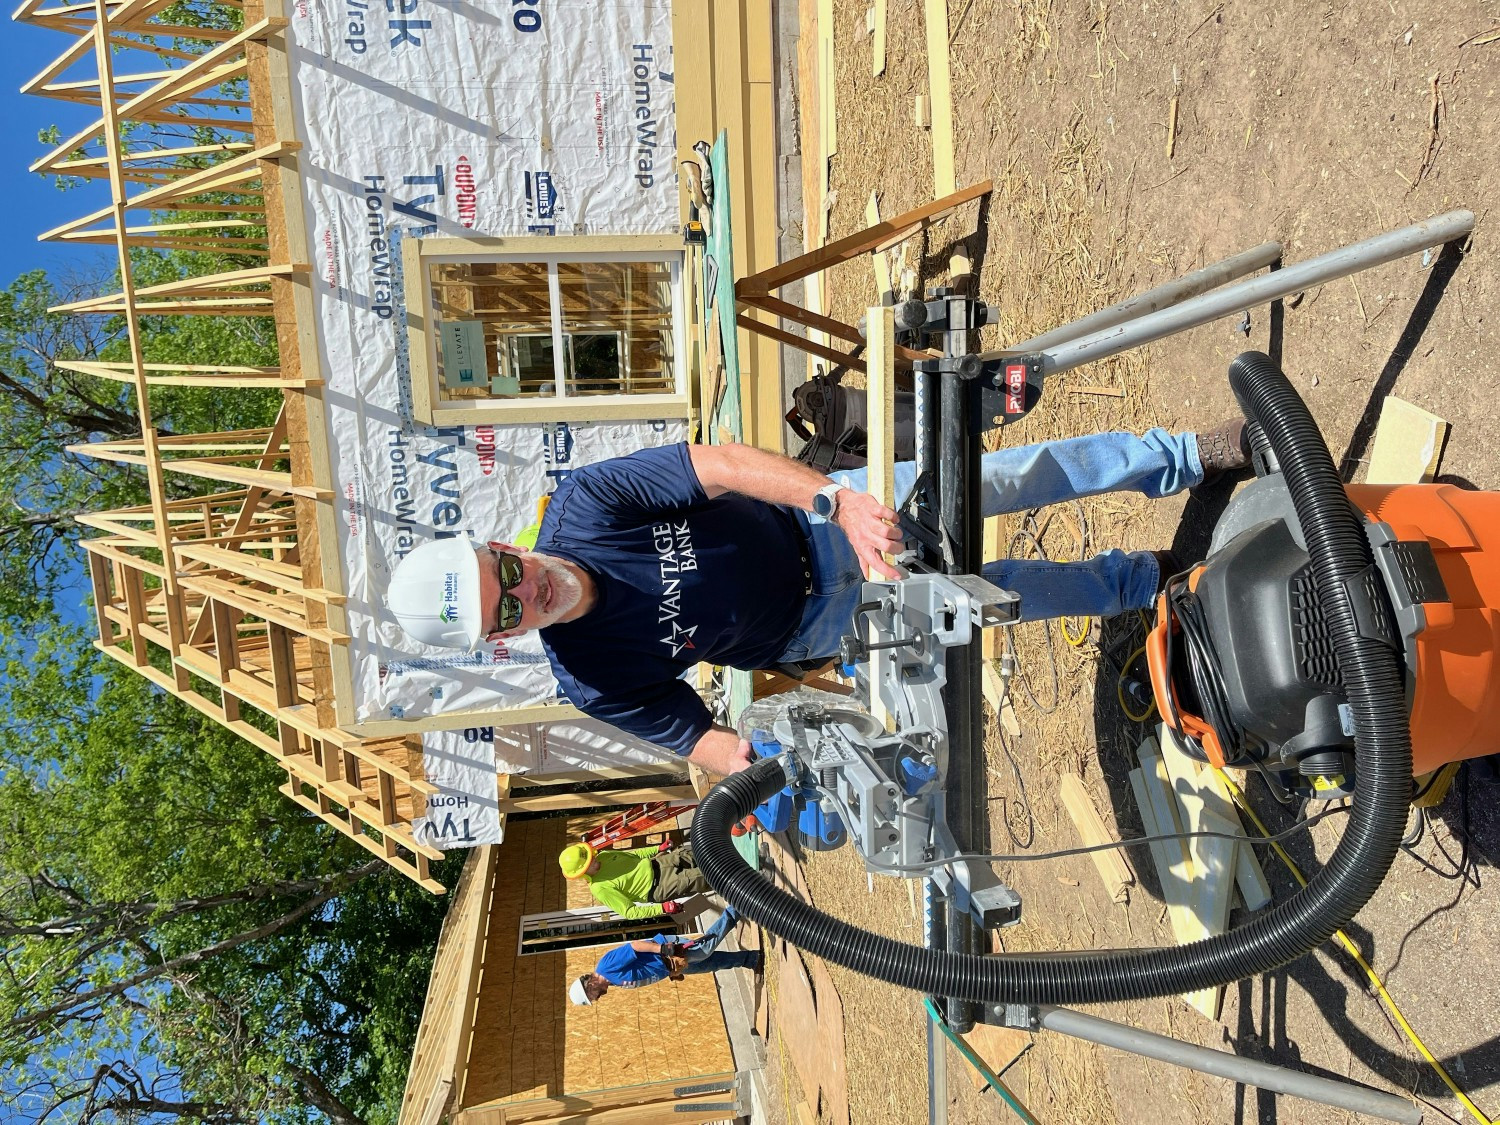 Our CEO getting his hands dirty and giving back to the community with Habitat for Humanity.